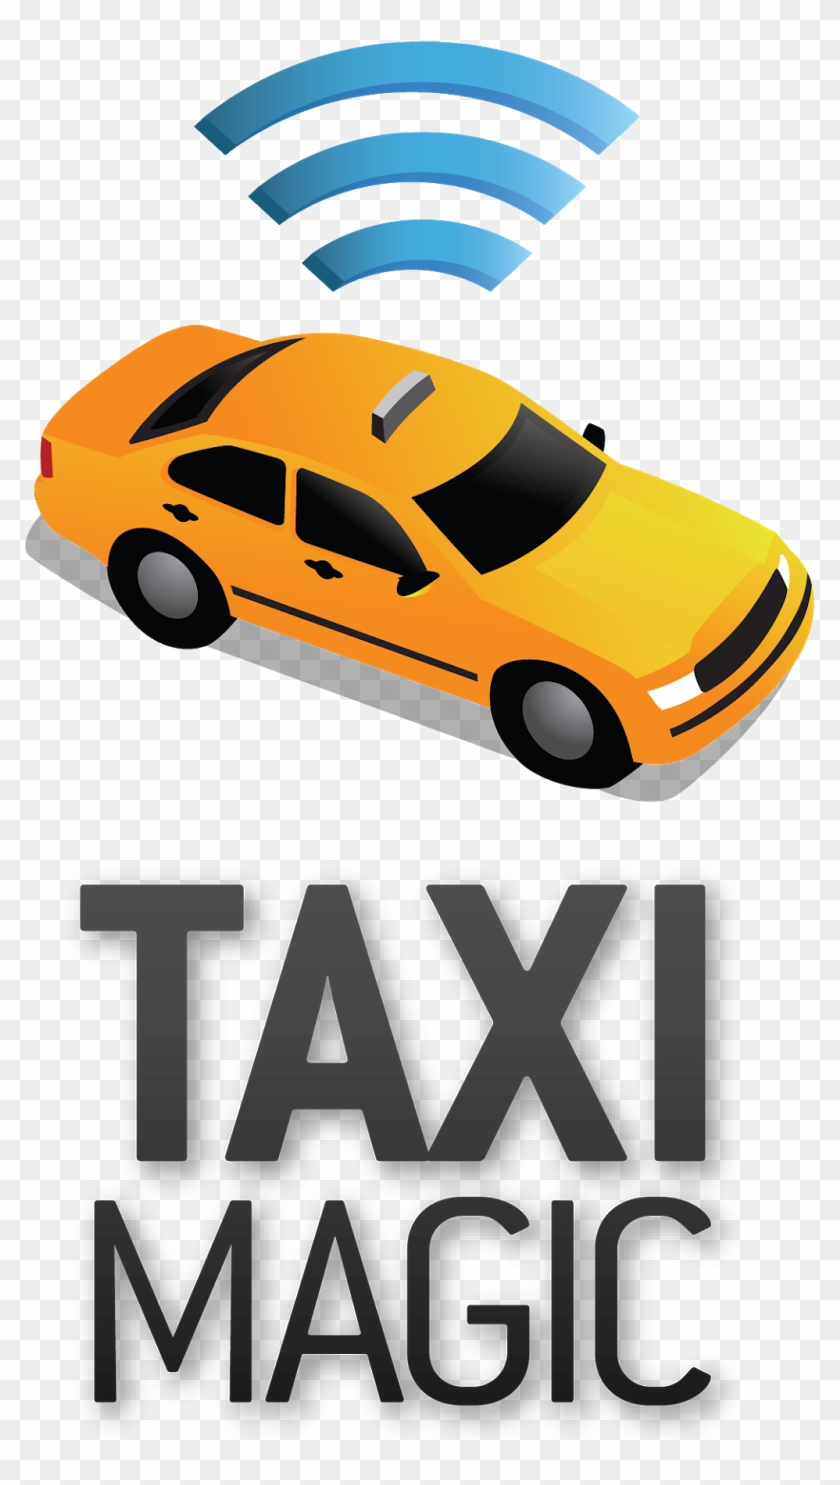 In Los Angeles Getting A Taxi Is Somewhat Of An Ordeal - Taxi Magic #1023389